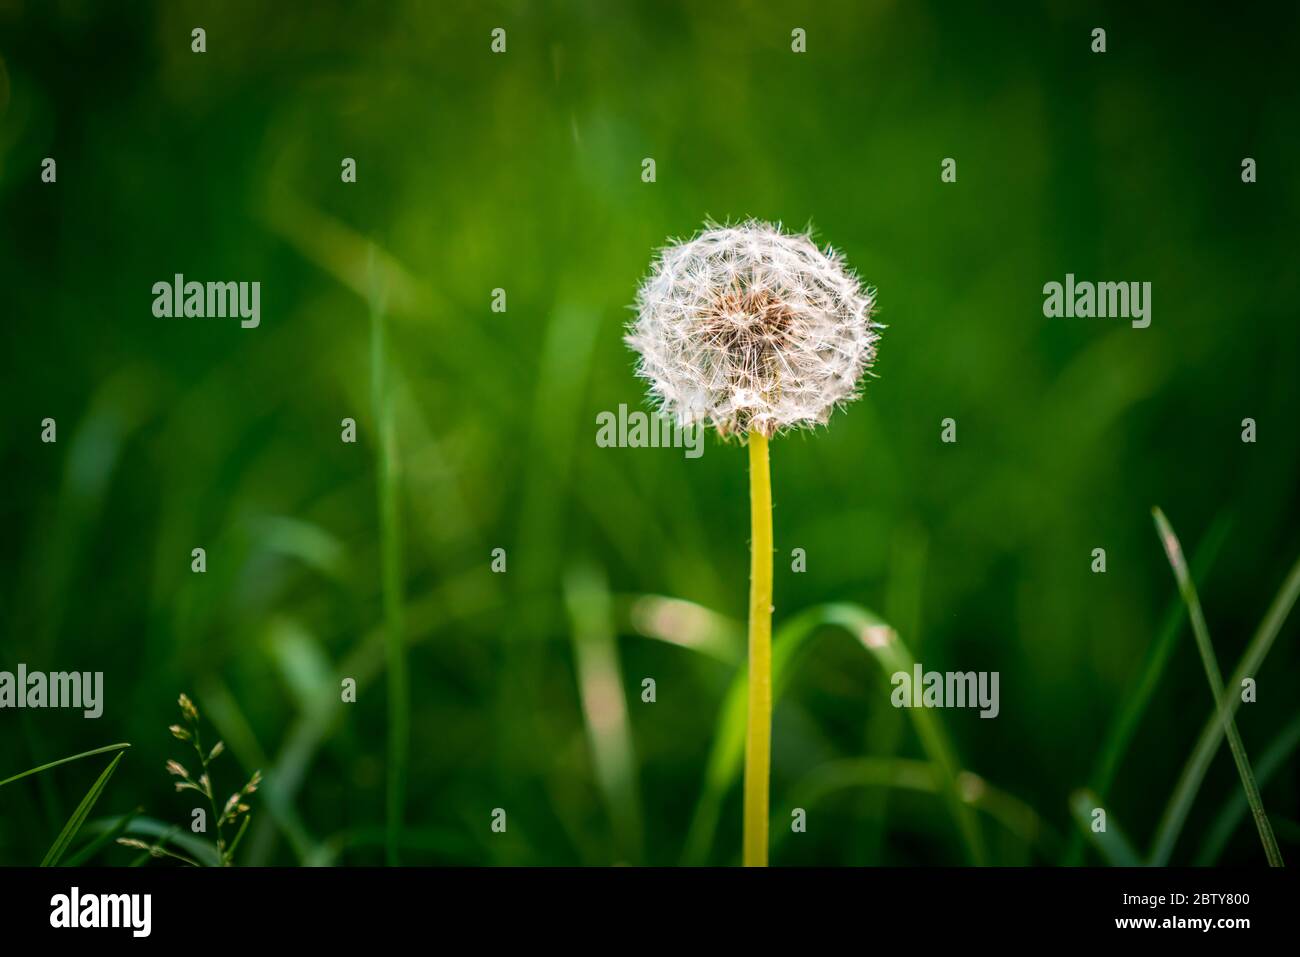 Sunlit round common dandelion on a bright green background of grass. Spring floral season - Photograph: Tony Taylor Stock Photo